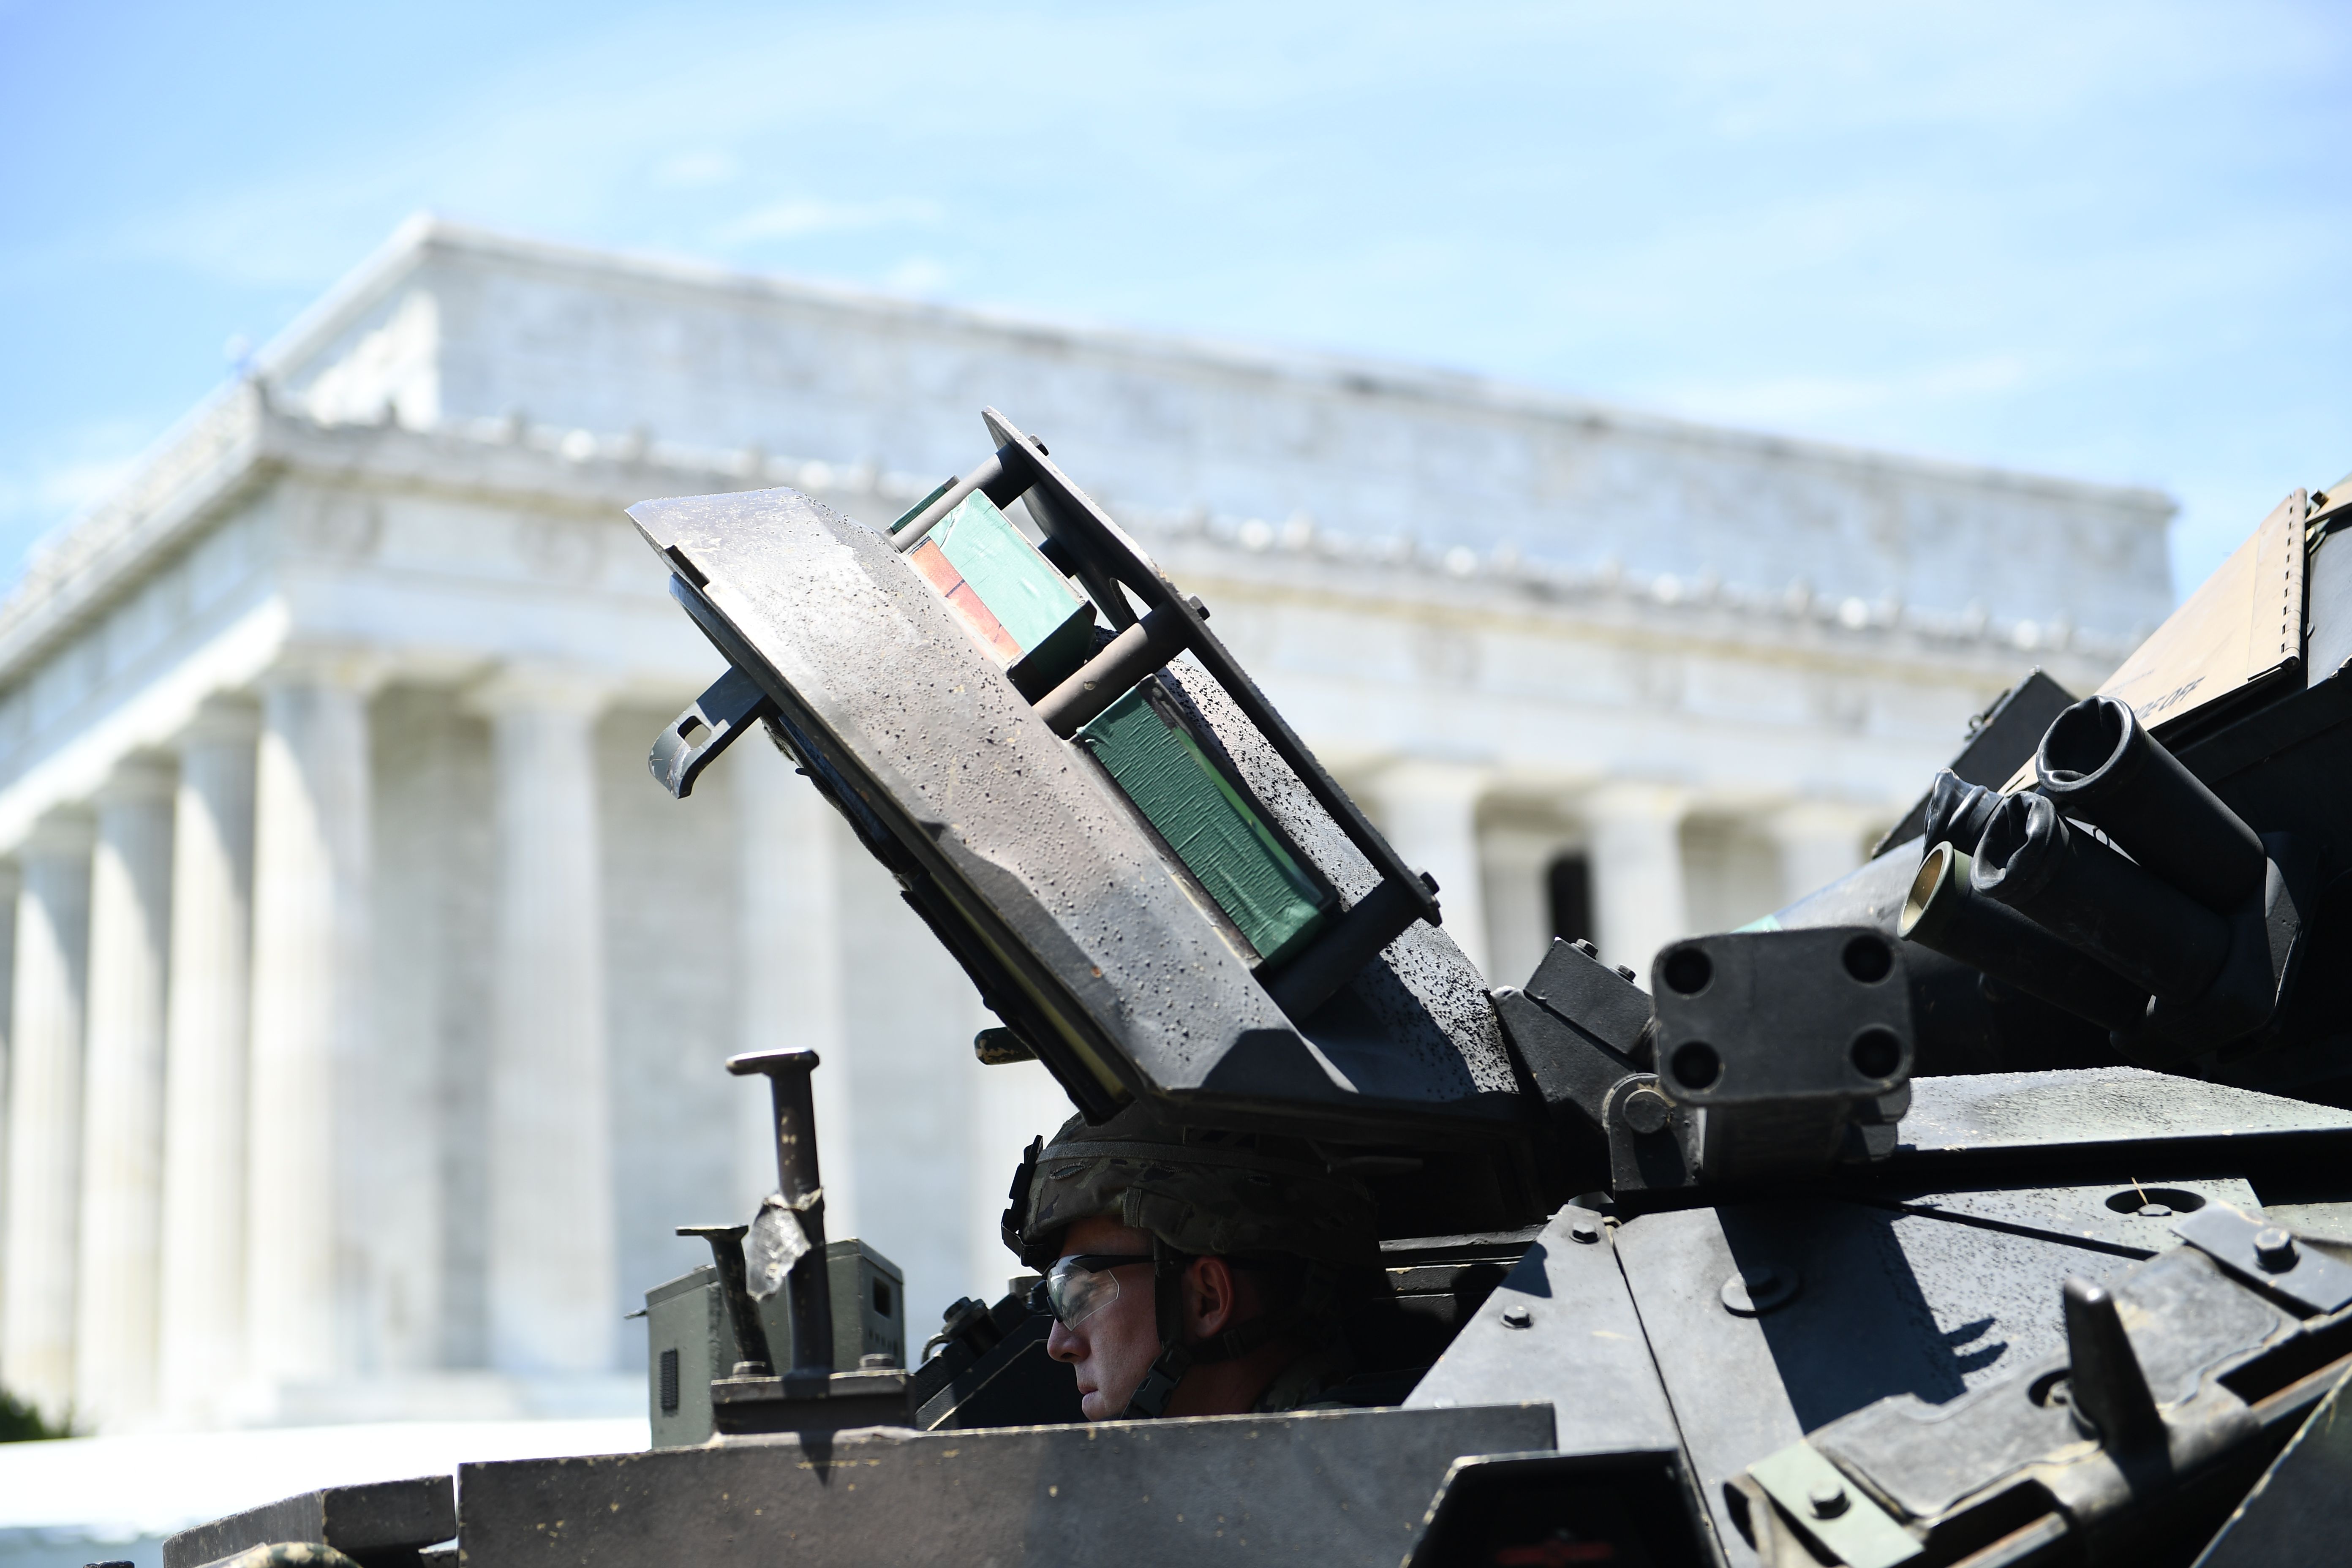 A Bradley Fighting Vehicle arrives July 3, 2019 as preparations are made for the "Salute to America" at the Lincoln Memorial on the National Mall in Washington, DC. 